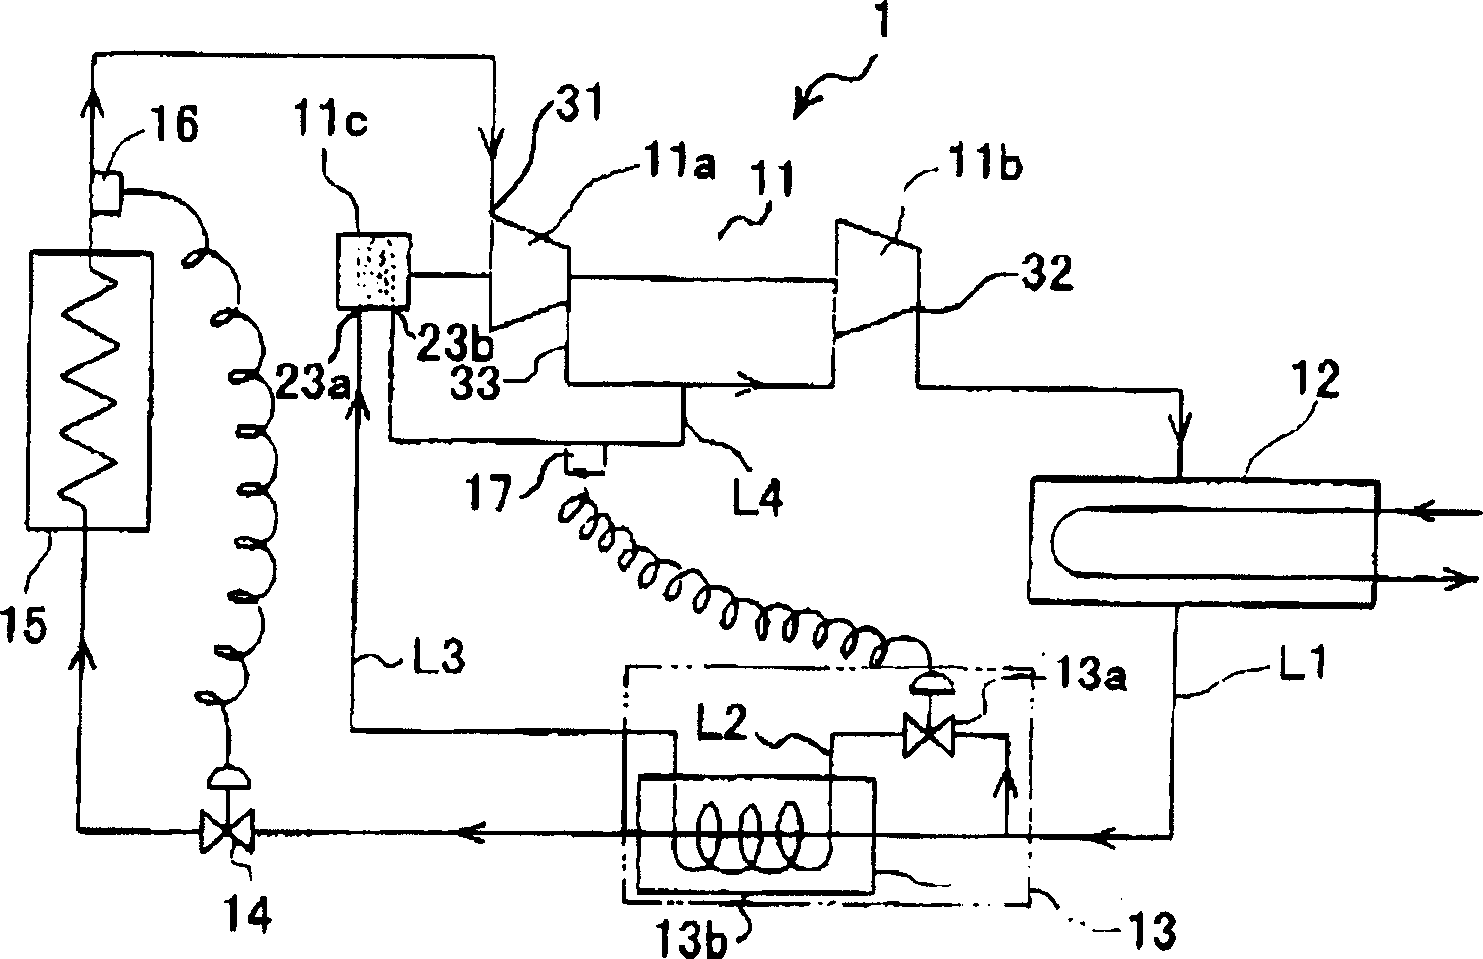 Auger-type refrigerating plant